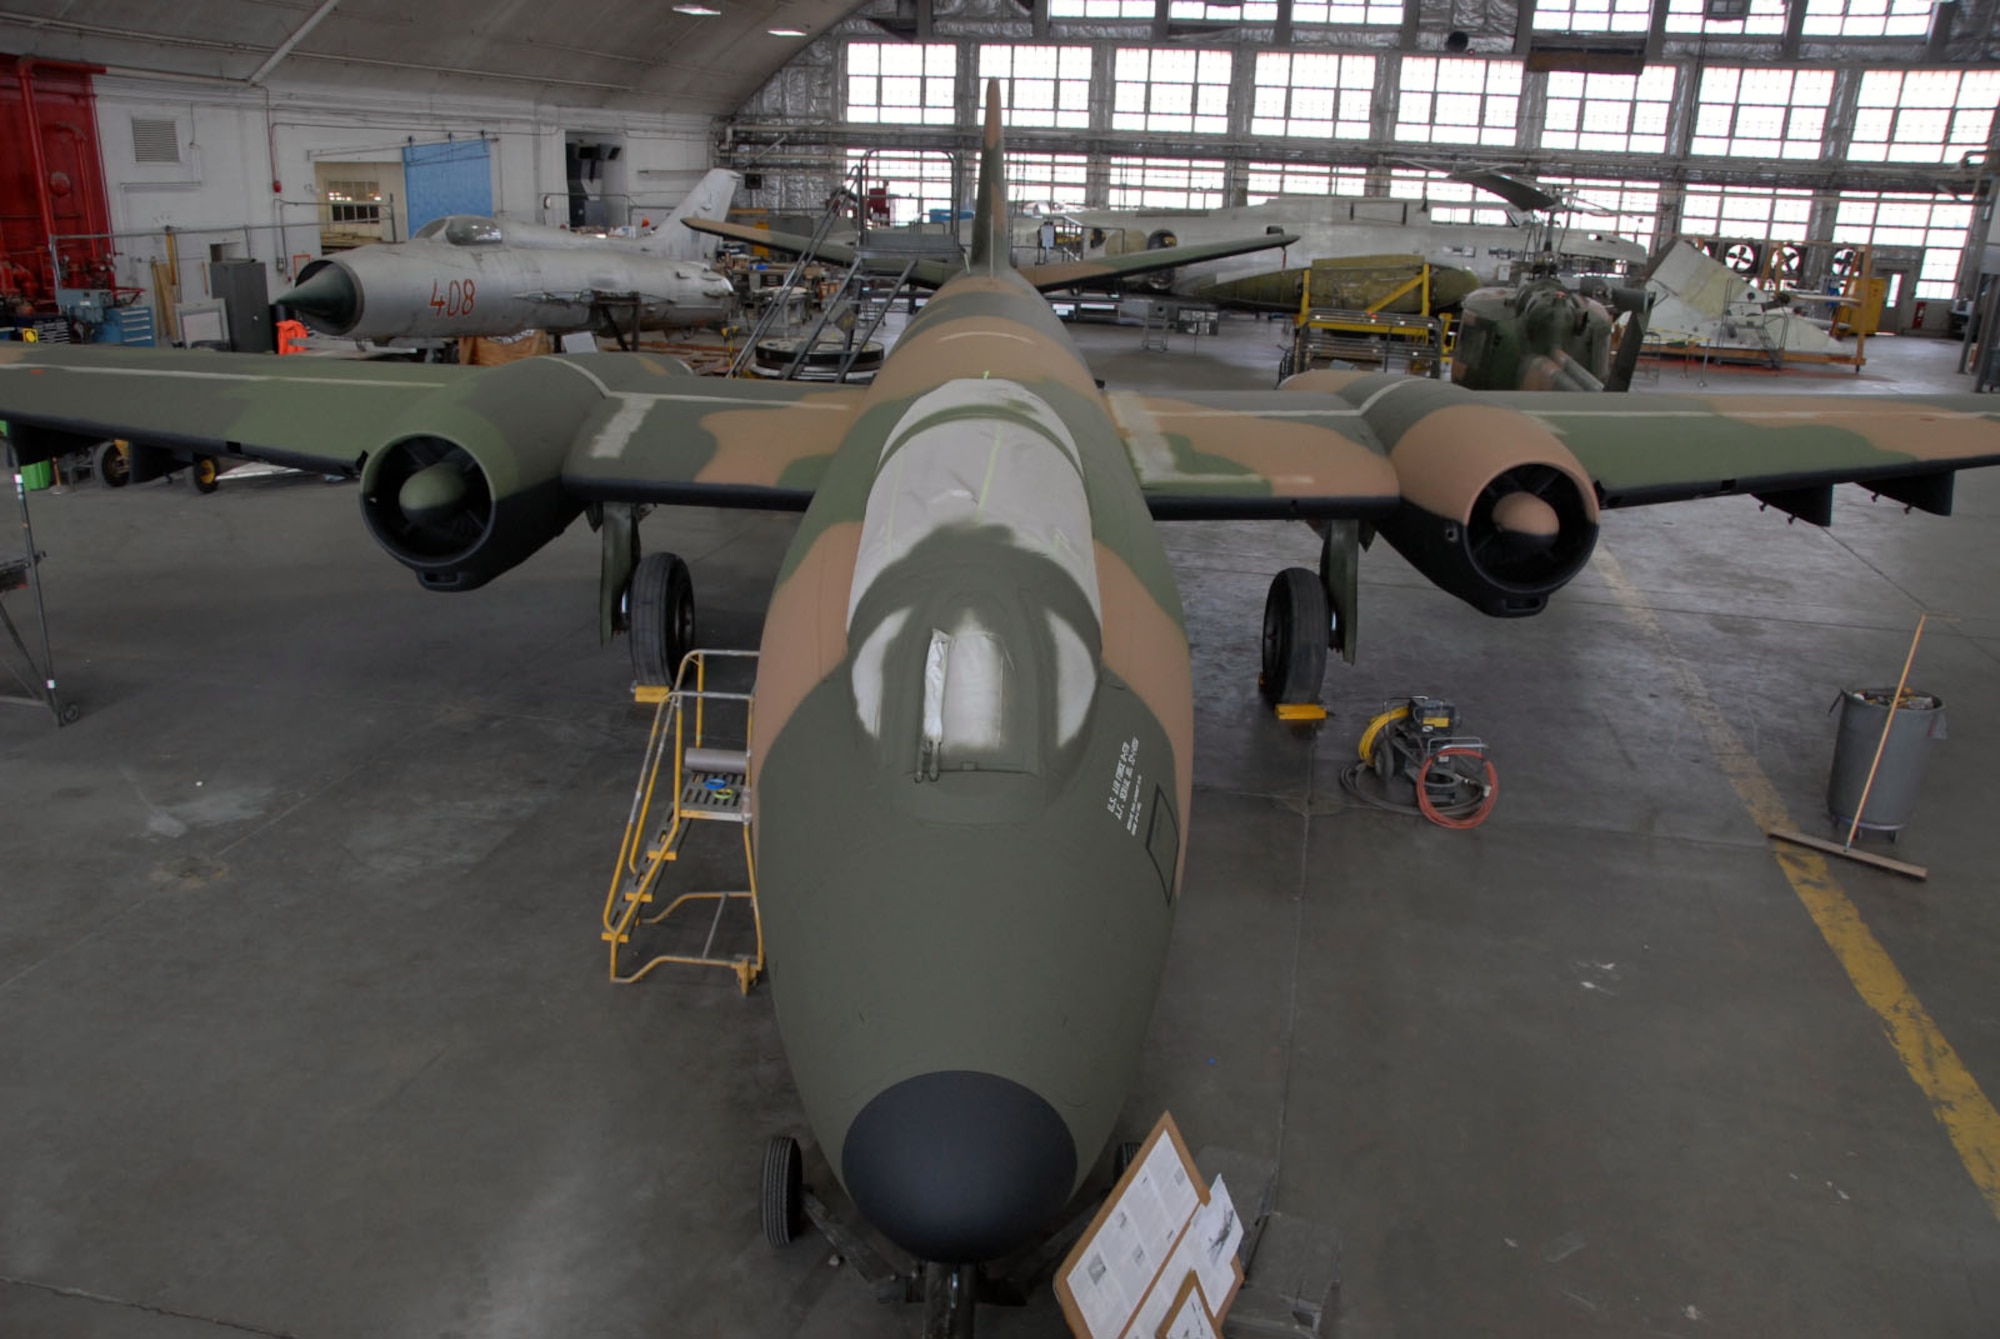 DAYTON, Ohio (11/2010) -- Martin B-57 in restoration at the National Museum of the U.S. Air Force. (U.S. Air Force photo)